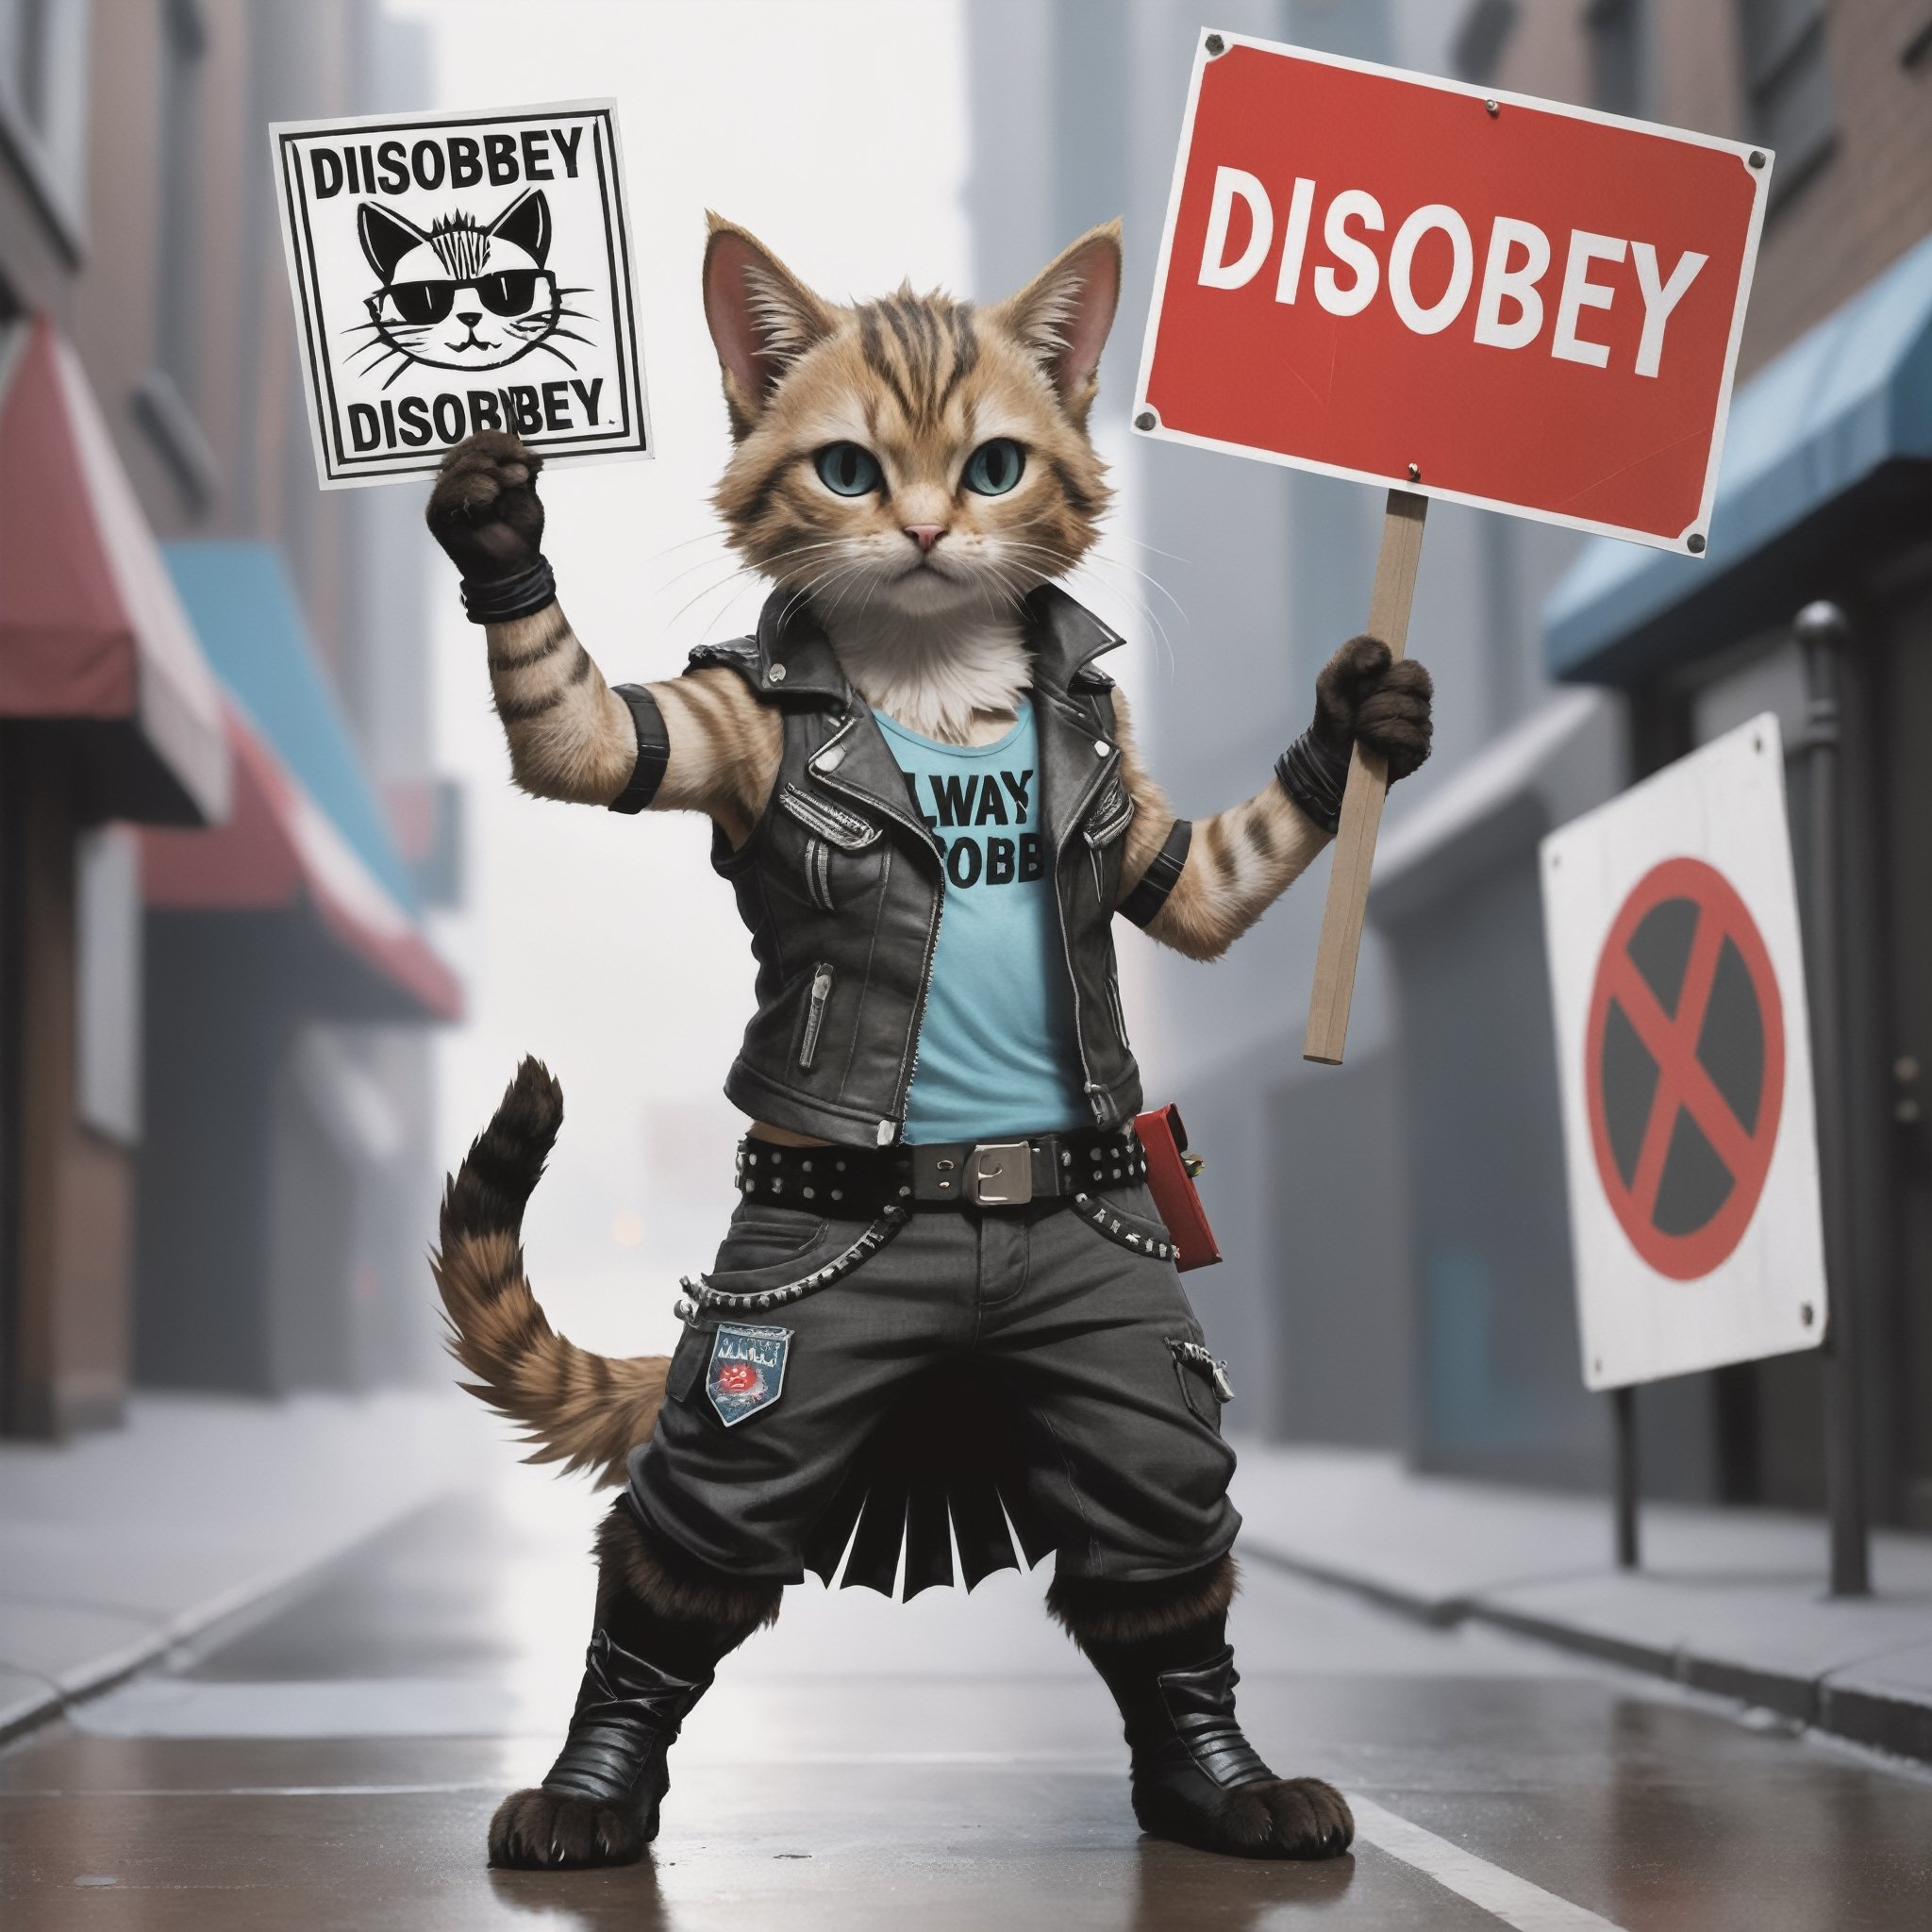 A punk cat holding up a sign "always disobey"